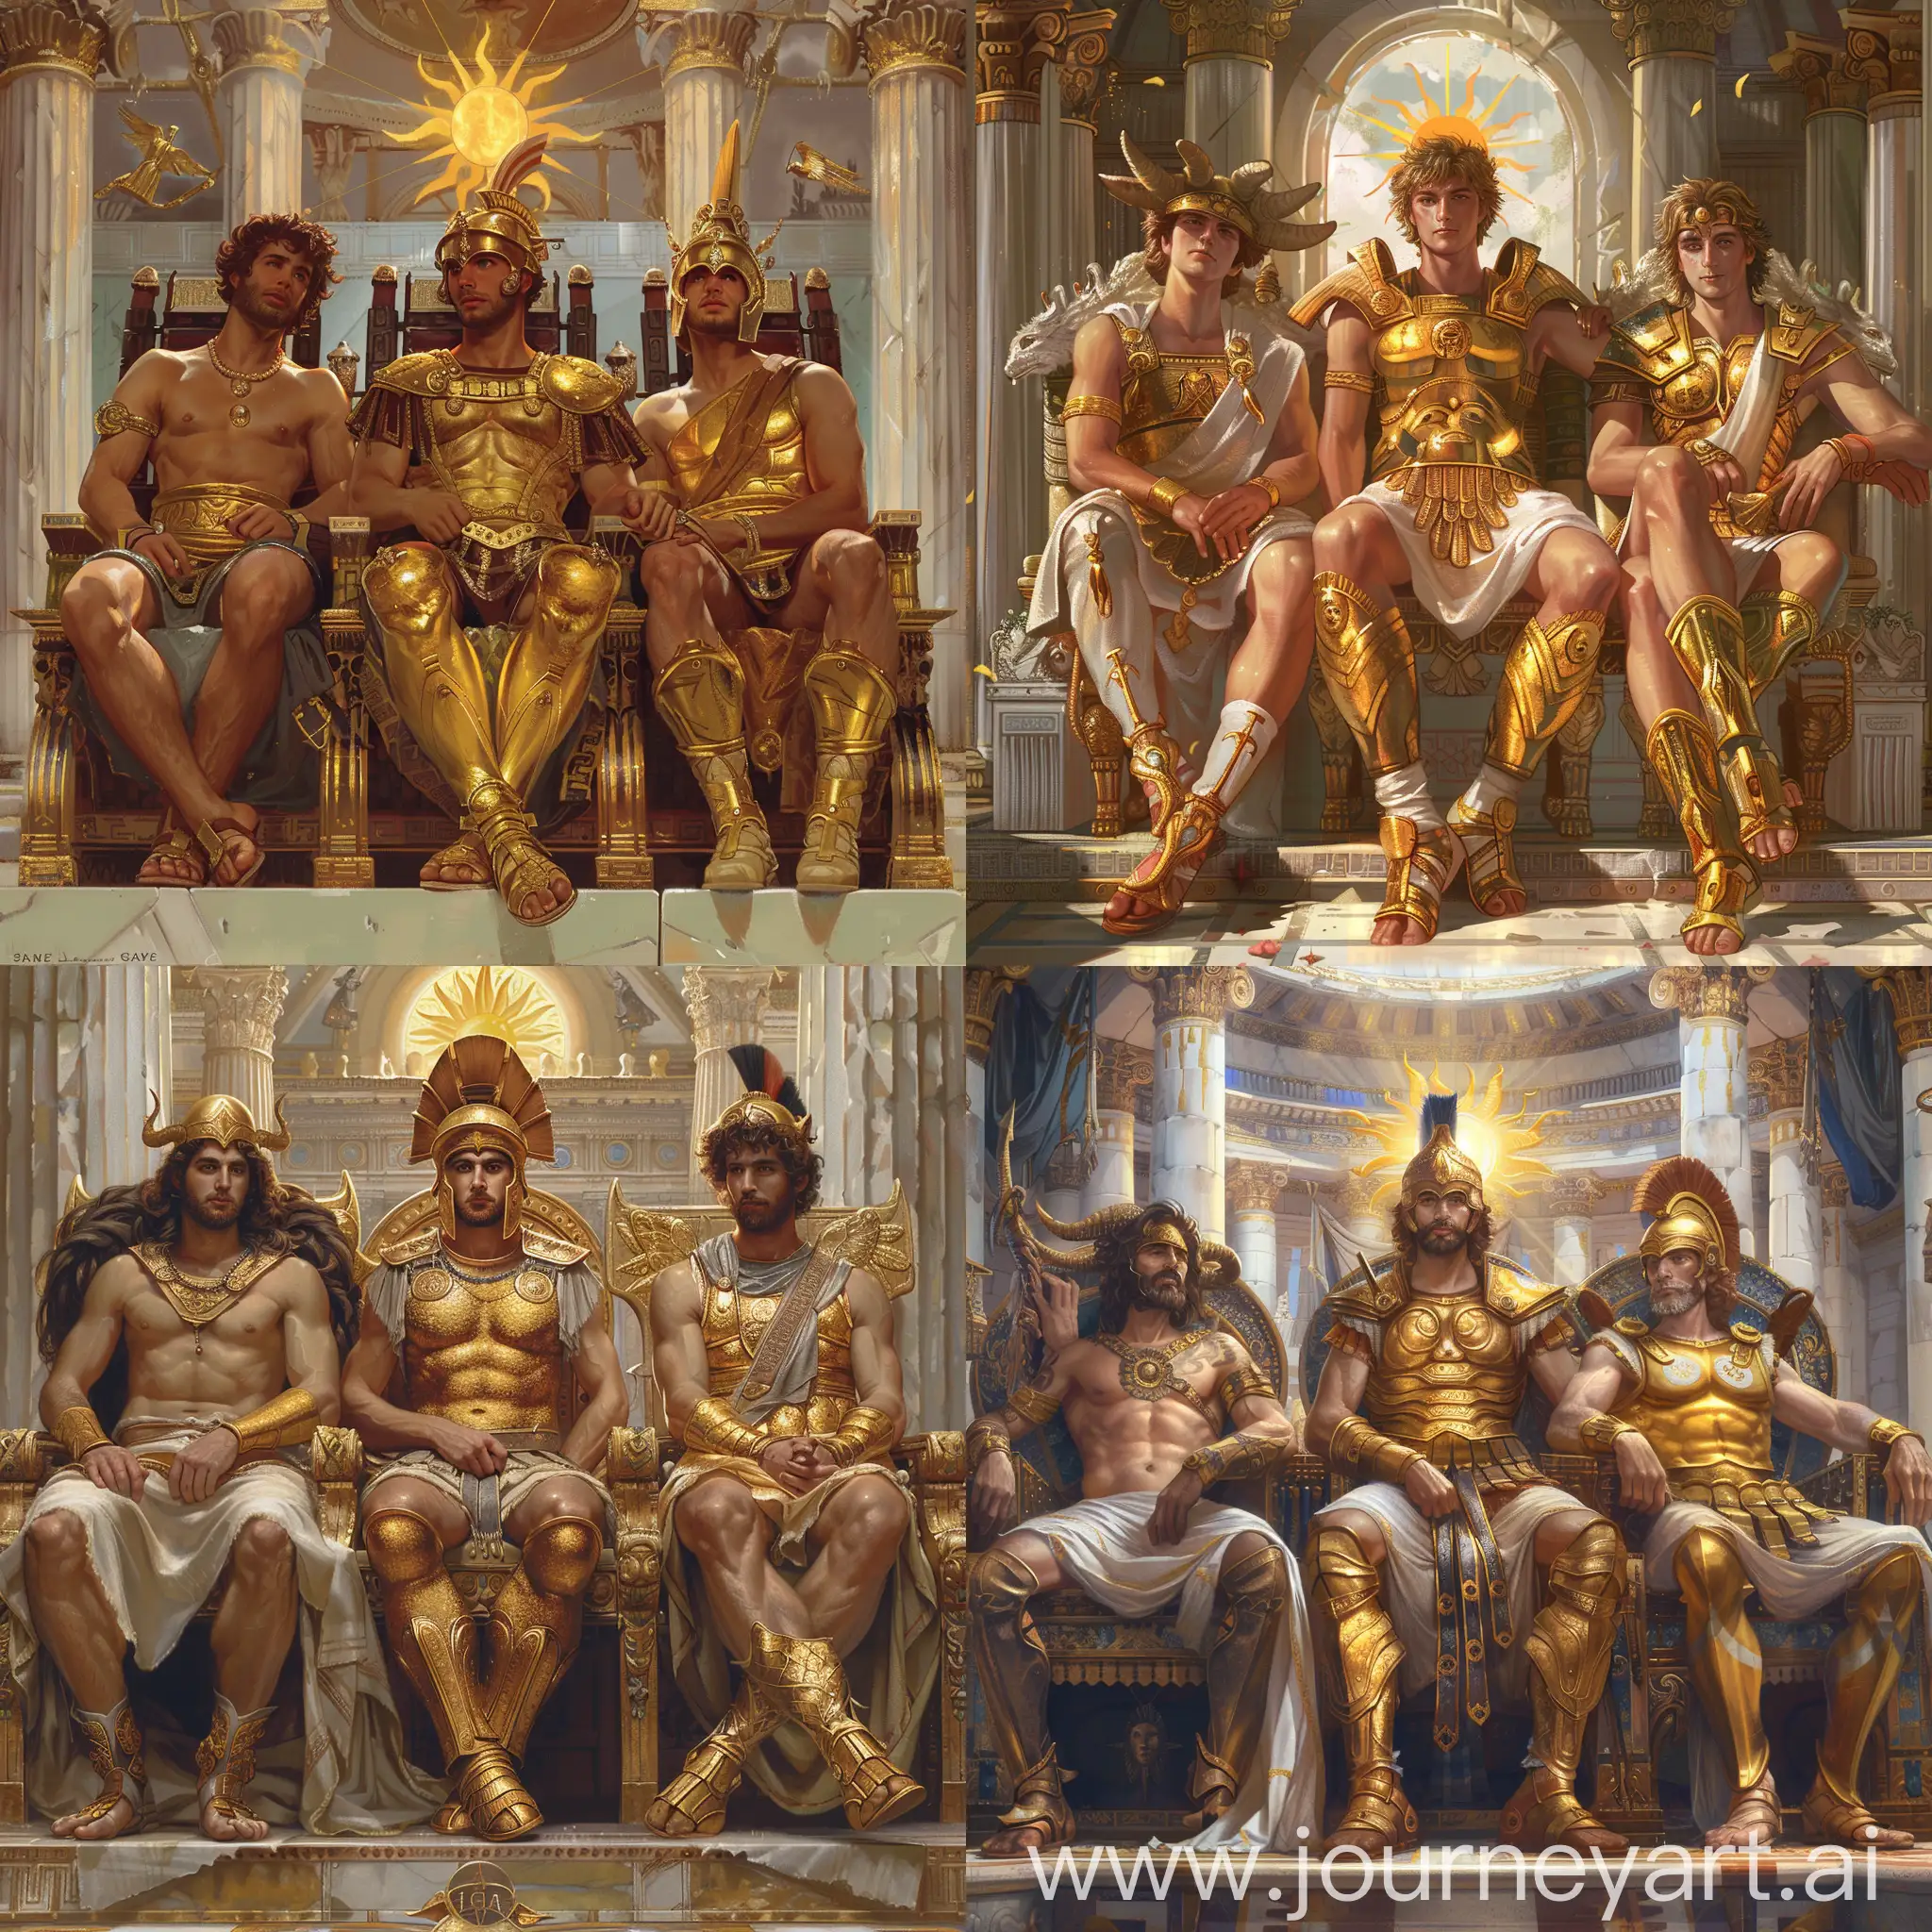 Three handsome mature Greek Gods are sitting on their imperial thrones. They are all about 30 years old.

At left, there is Dionysus.

At right, there is Mercury.

In the middle, there is Apollo in golden armor and boots, with a sun Aurora behind Apollo's head.

They are both inside a splendid greek temple.